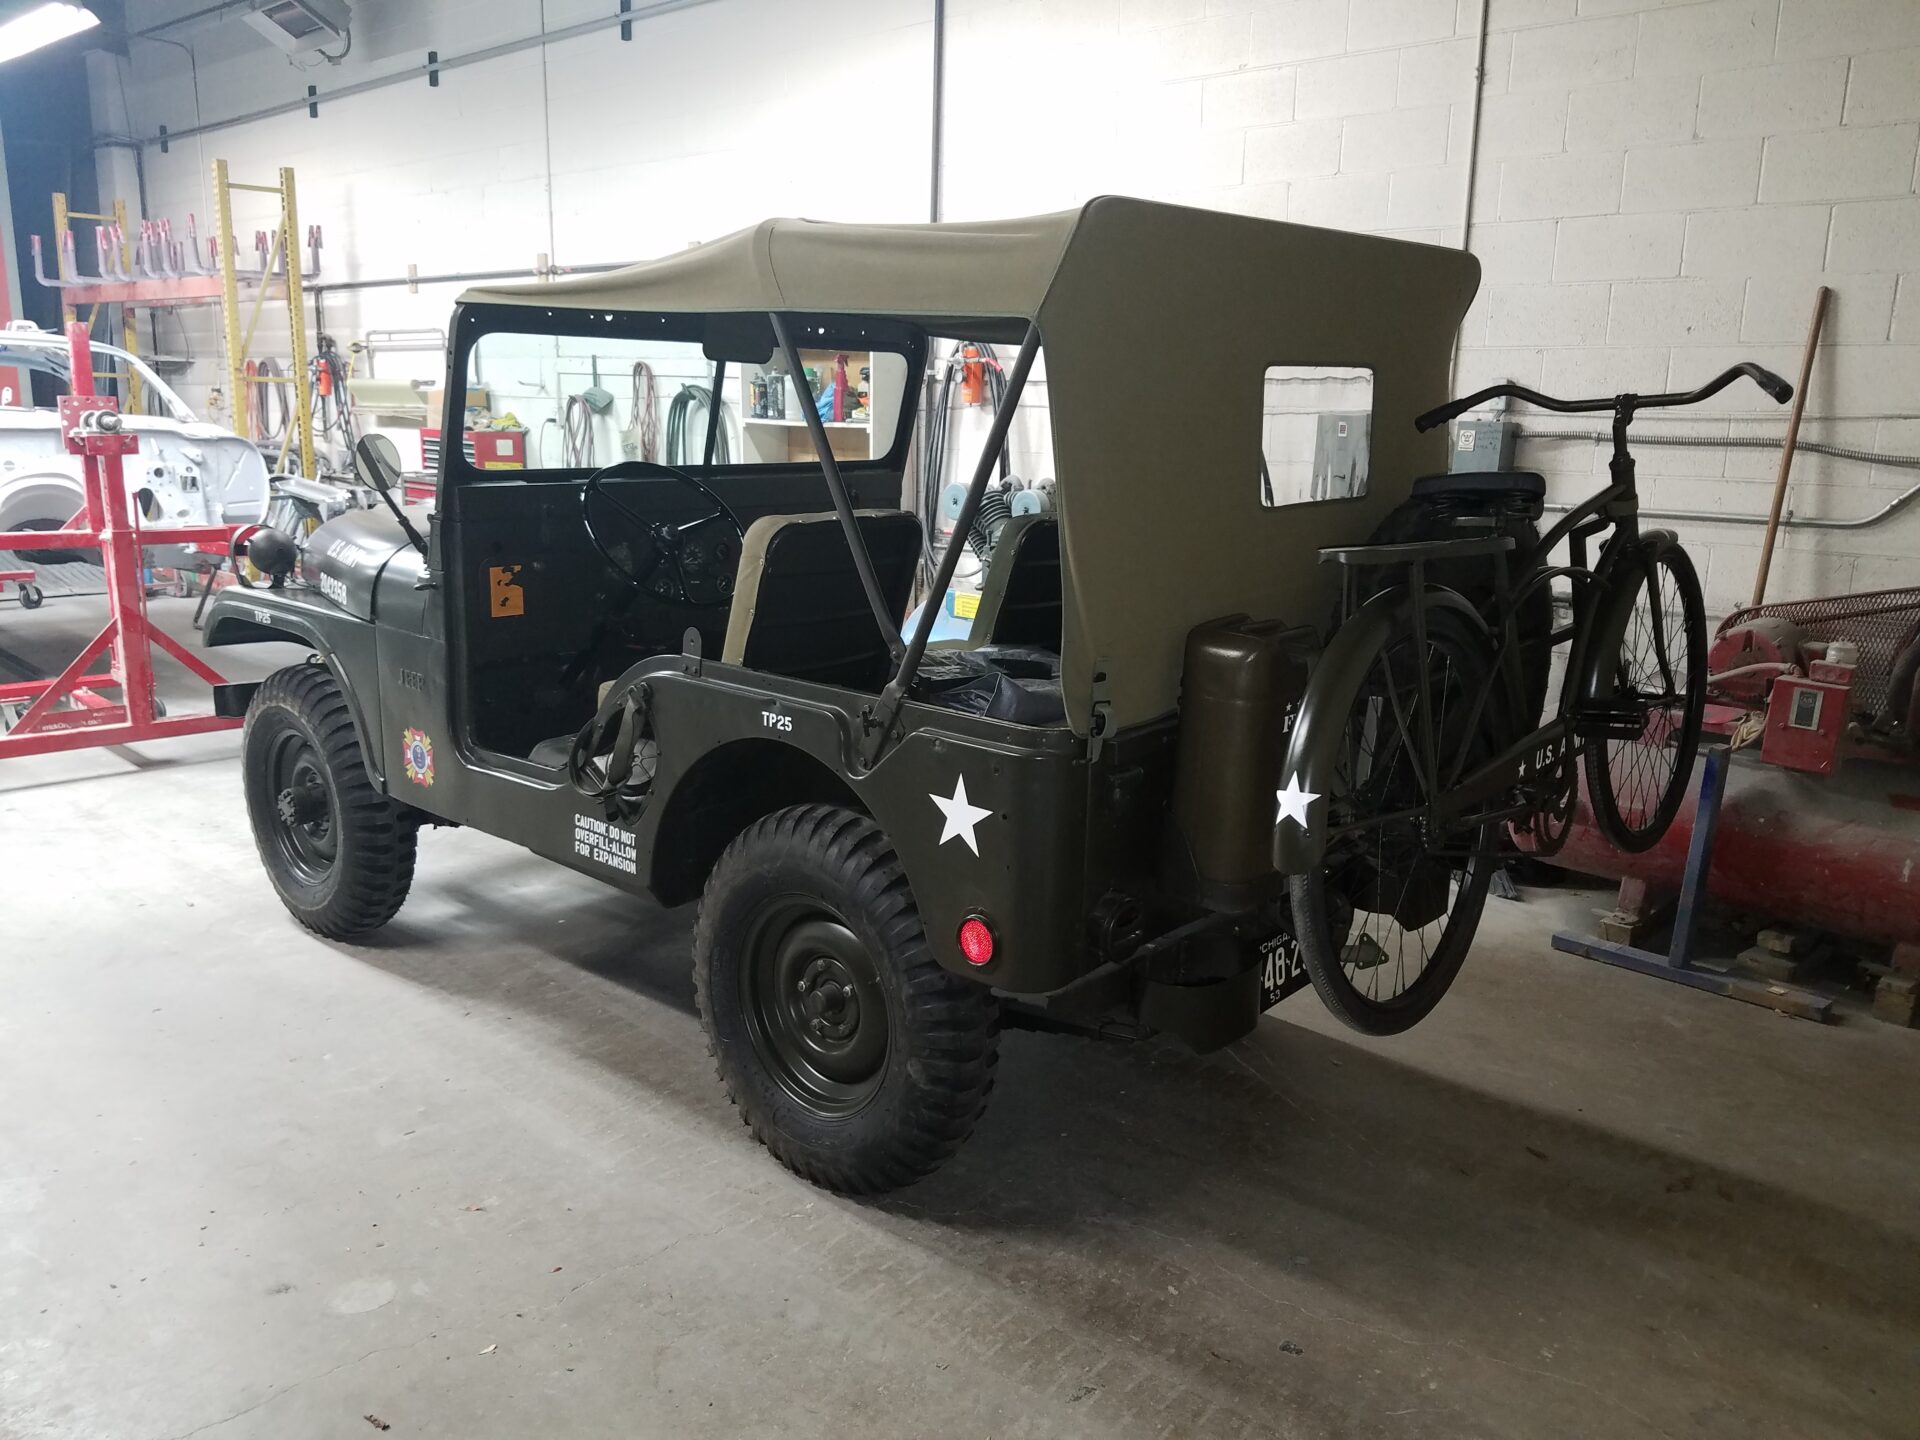 A side view of the 1953 Military Jeep